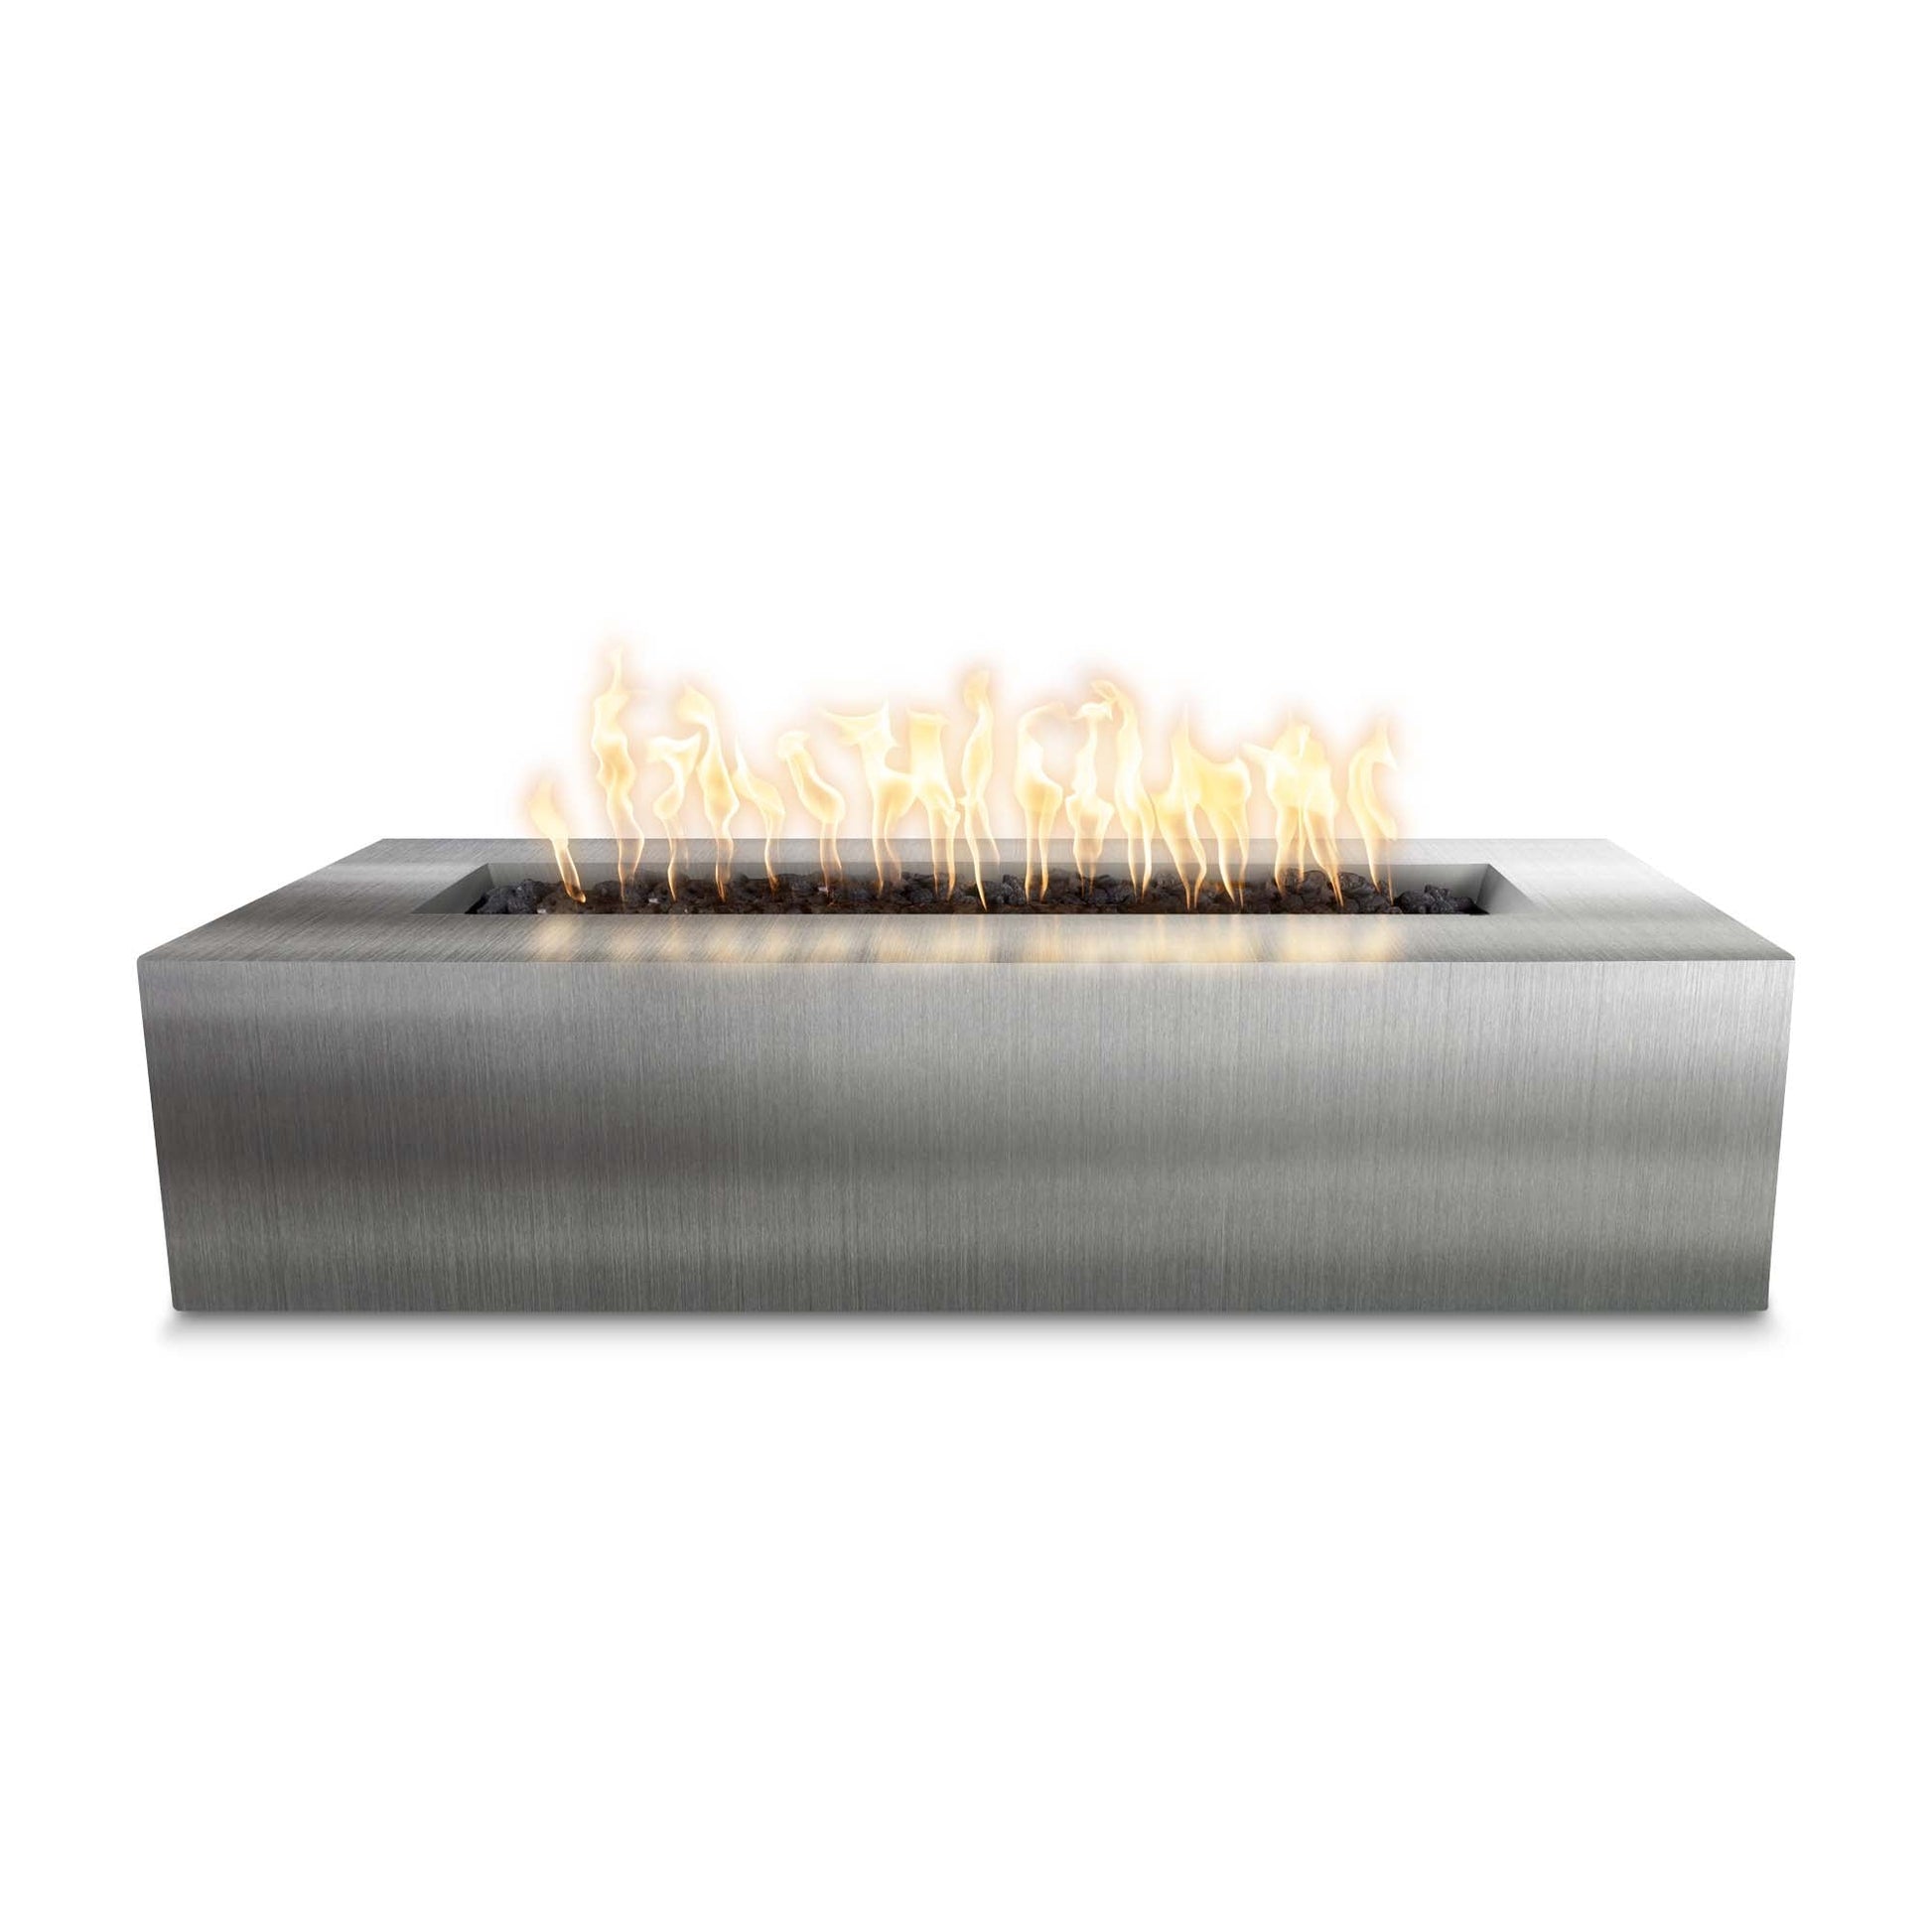 The Outdoor Plus Rectangular Regal 60" Stainless Steel Liquid Propane Fire Pit with 110V Electronic Ignition